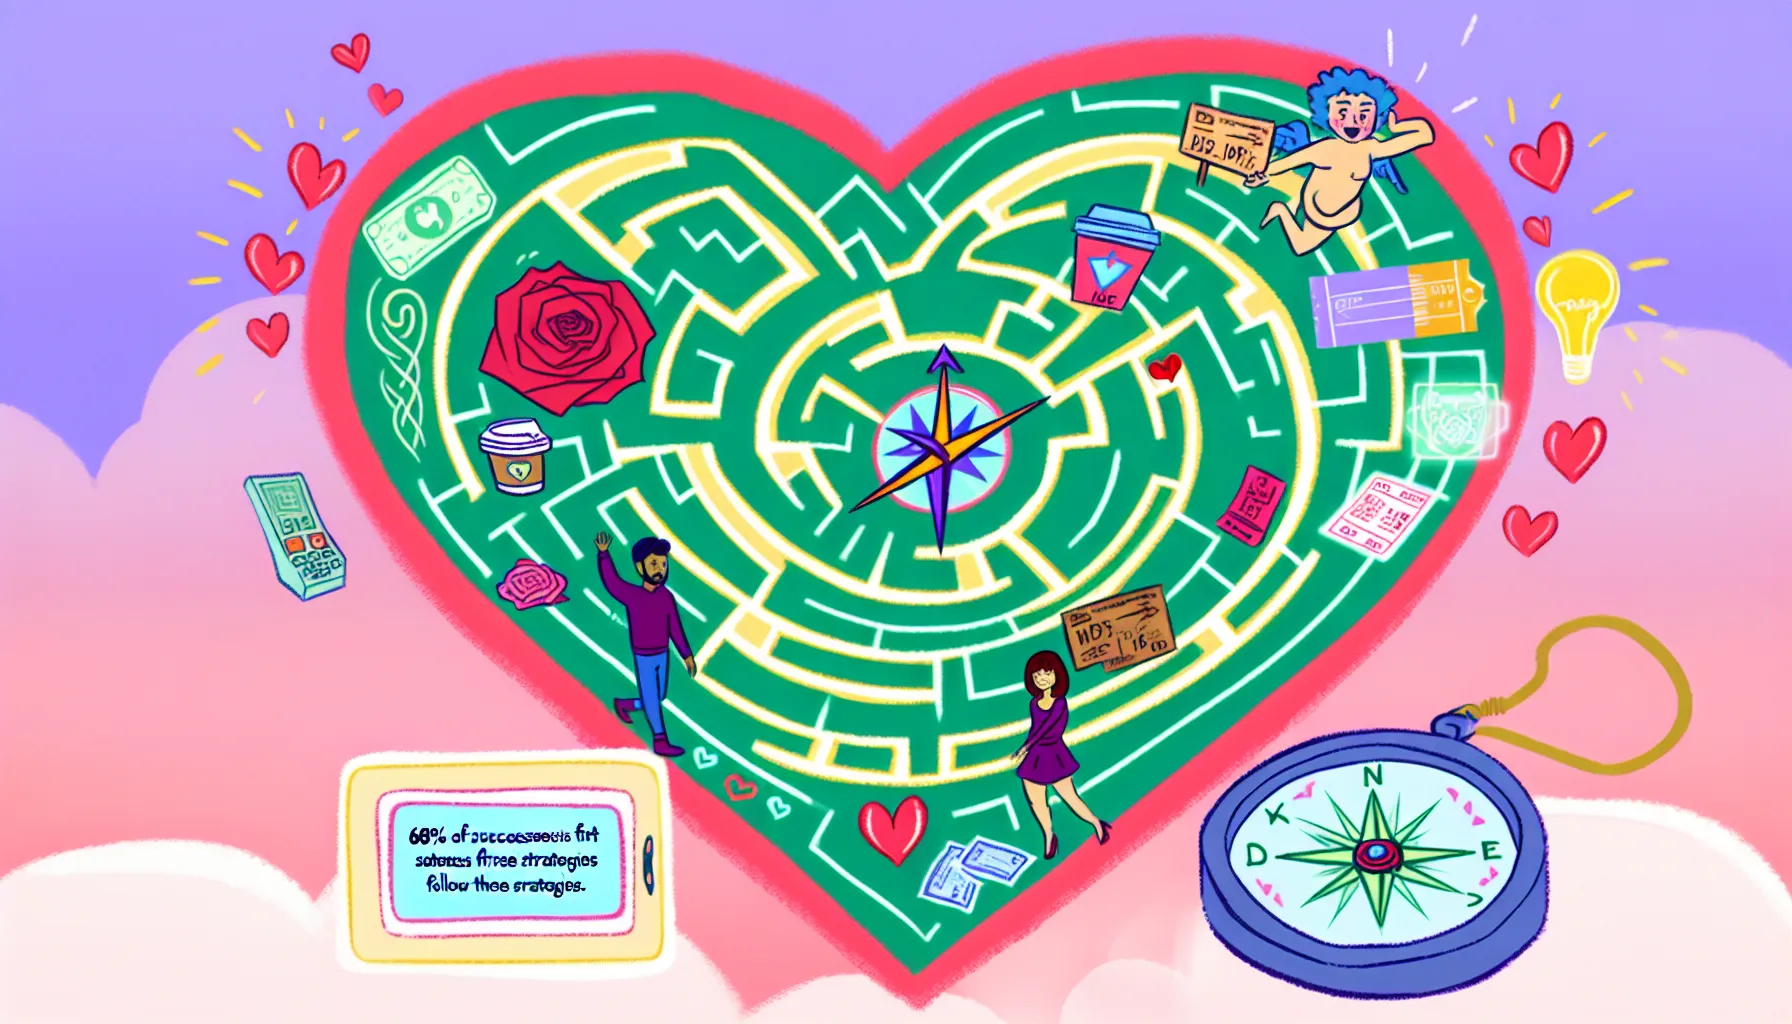 Heart-shaped dating maze with 15 strategies and success rate